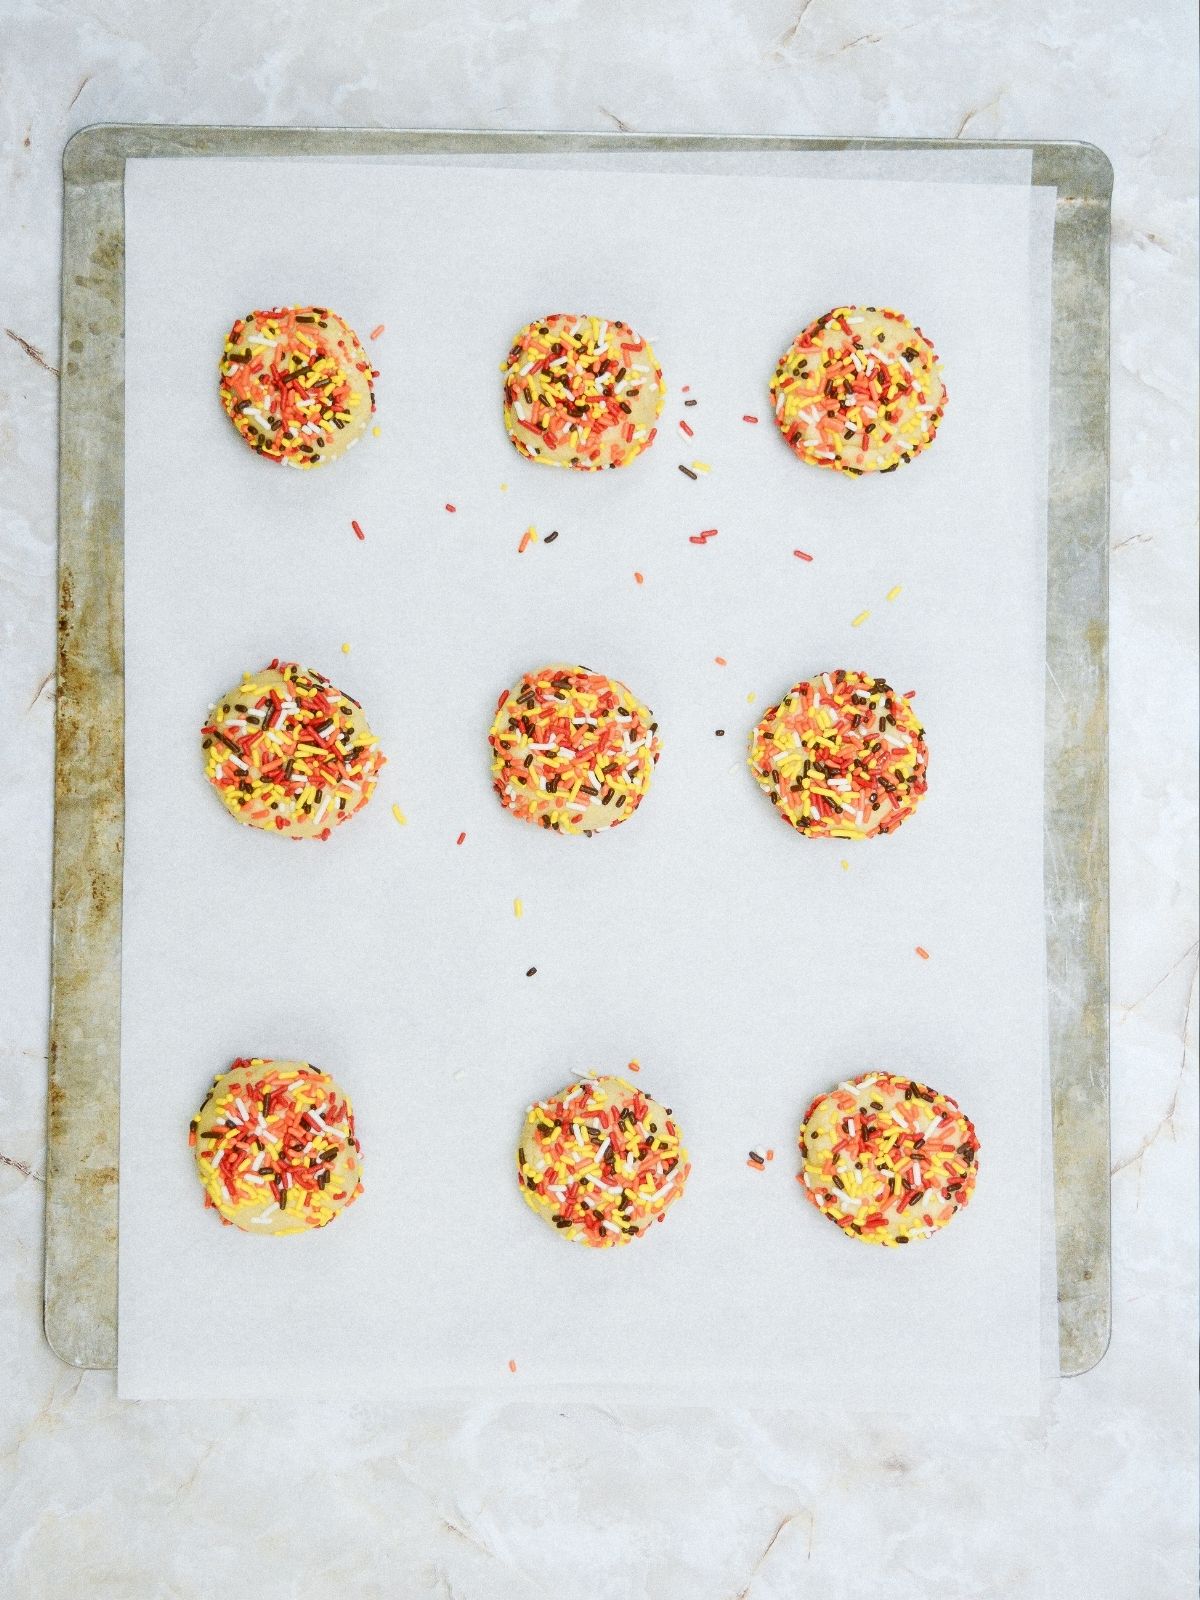 cookies before baking on cookie sheet pan with parchment paper.